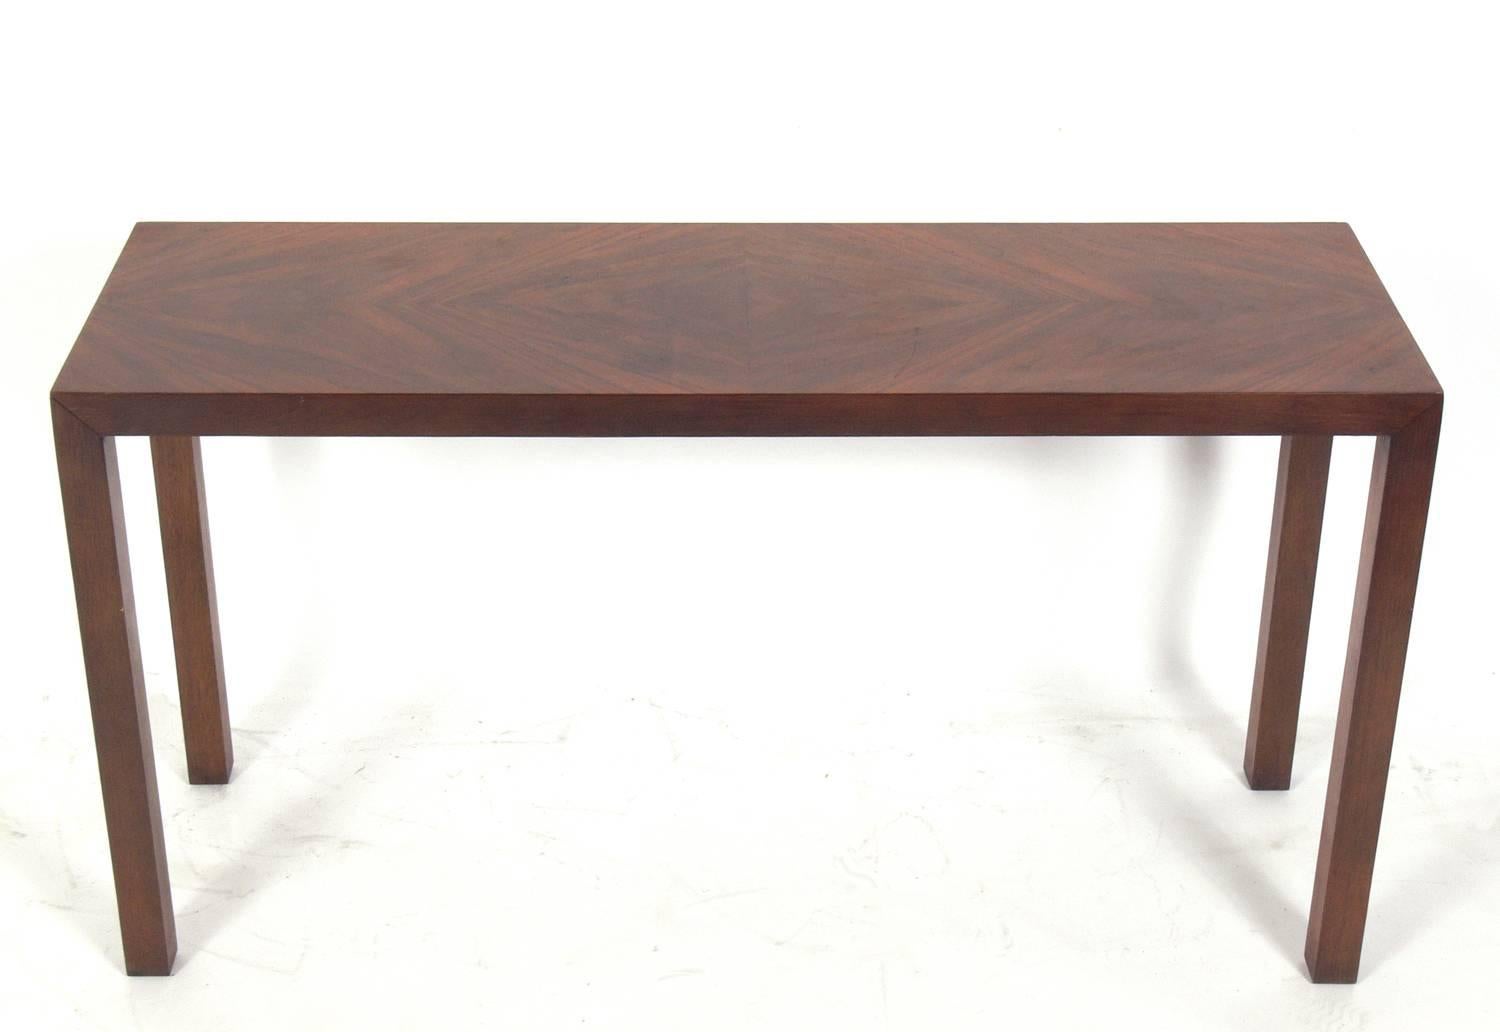 Clean lined rosewood console table, American, circa 1960s. This piece is a versatile size and can be used as a console or sofa table, vanity, bar, or desk. Clean lined design with beautifully grained rosewood.